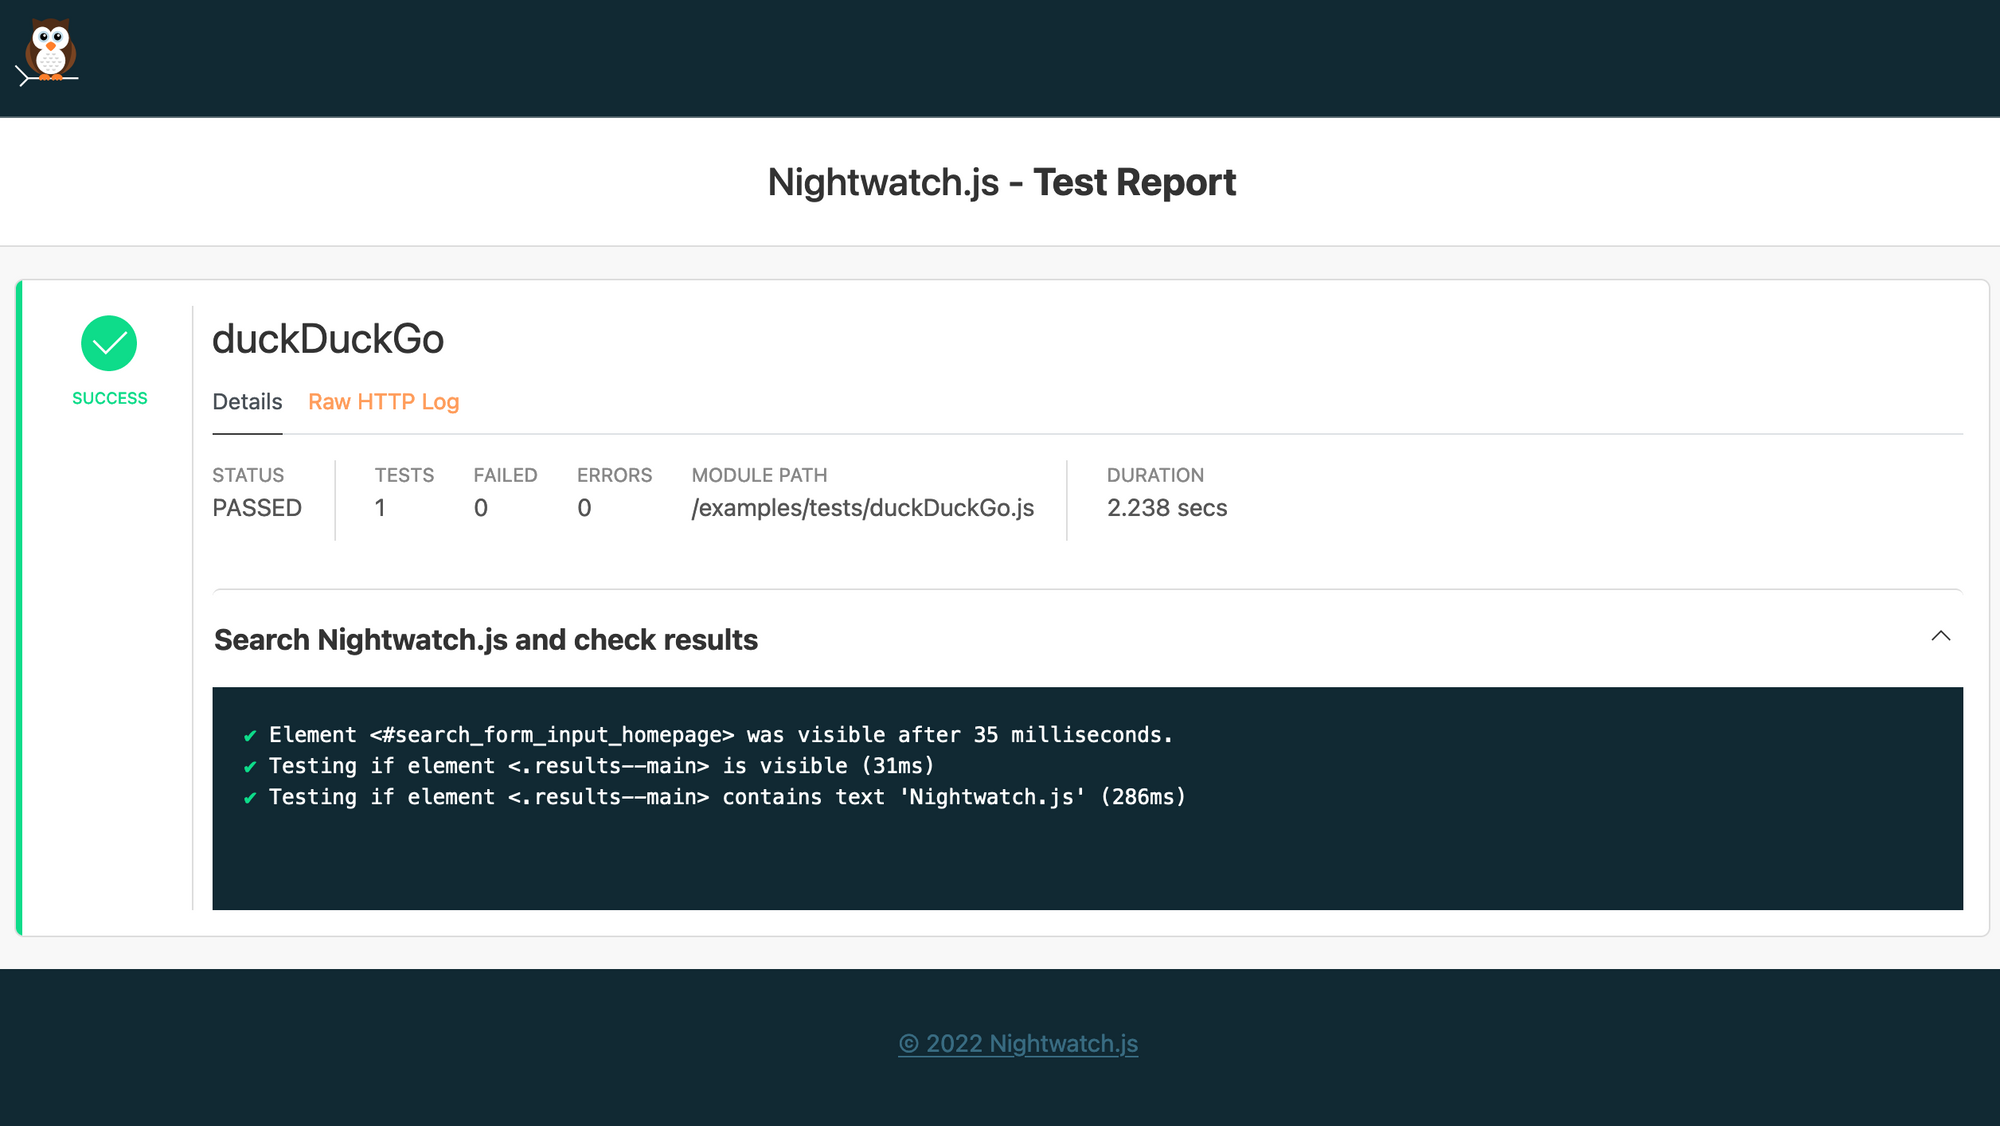 Publish your Nightwatch HTML Report on Github Pages